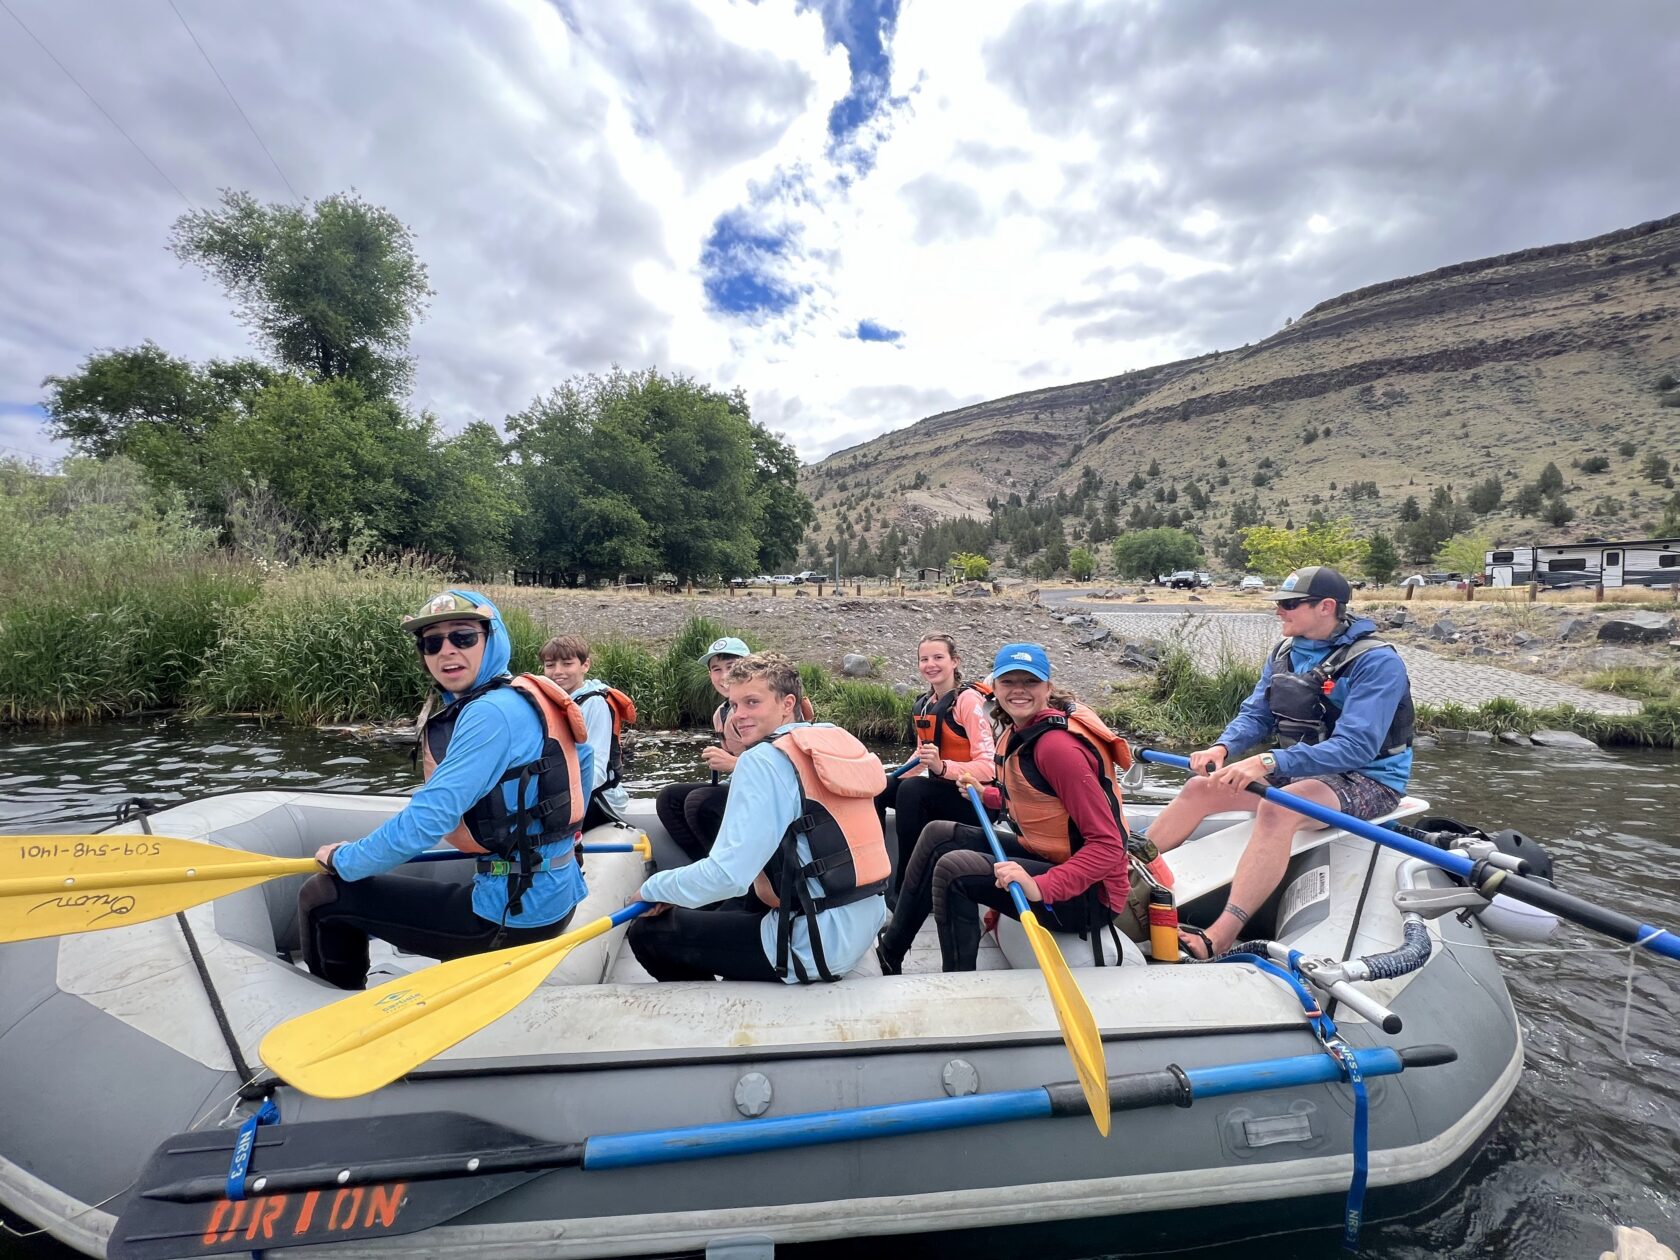 Students whitewater rafting in Oregon